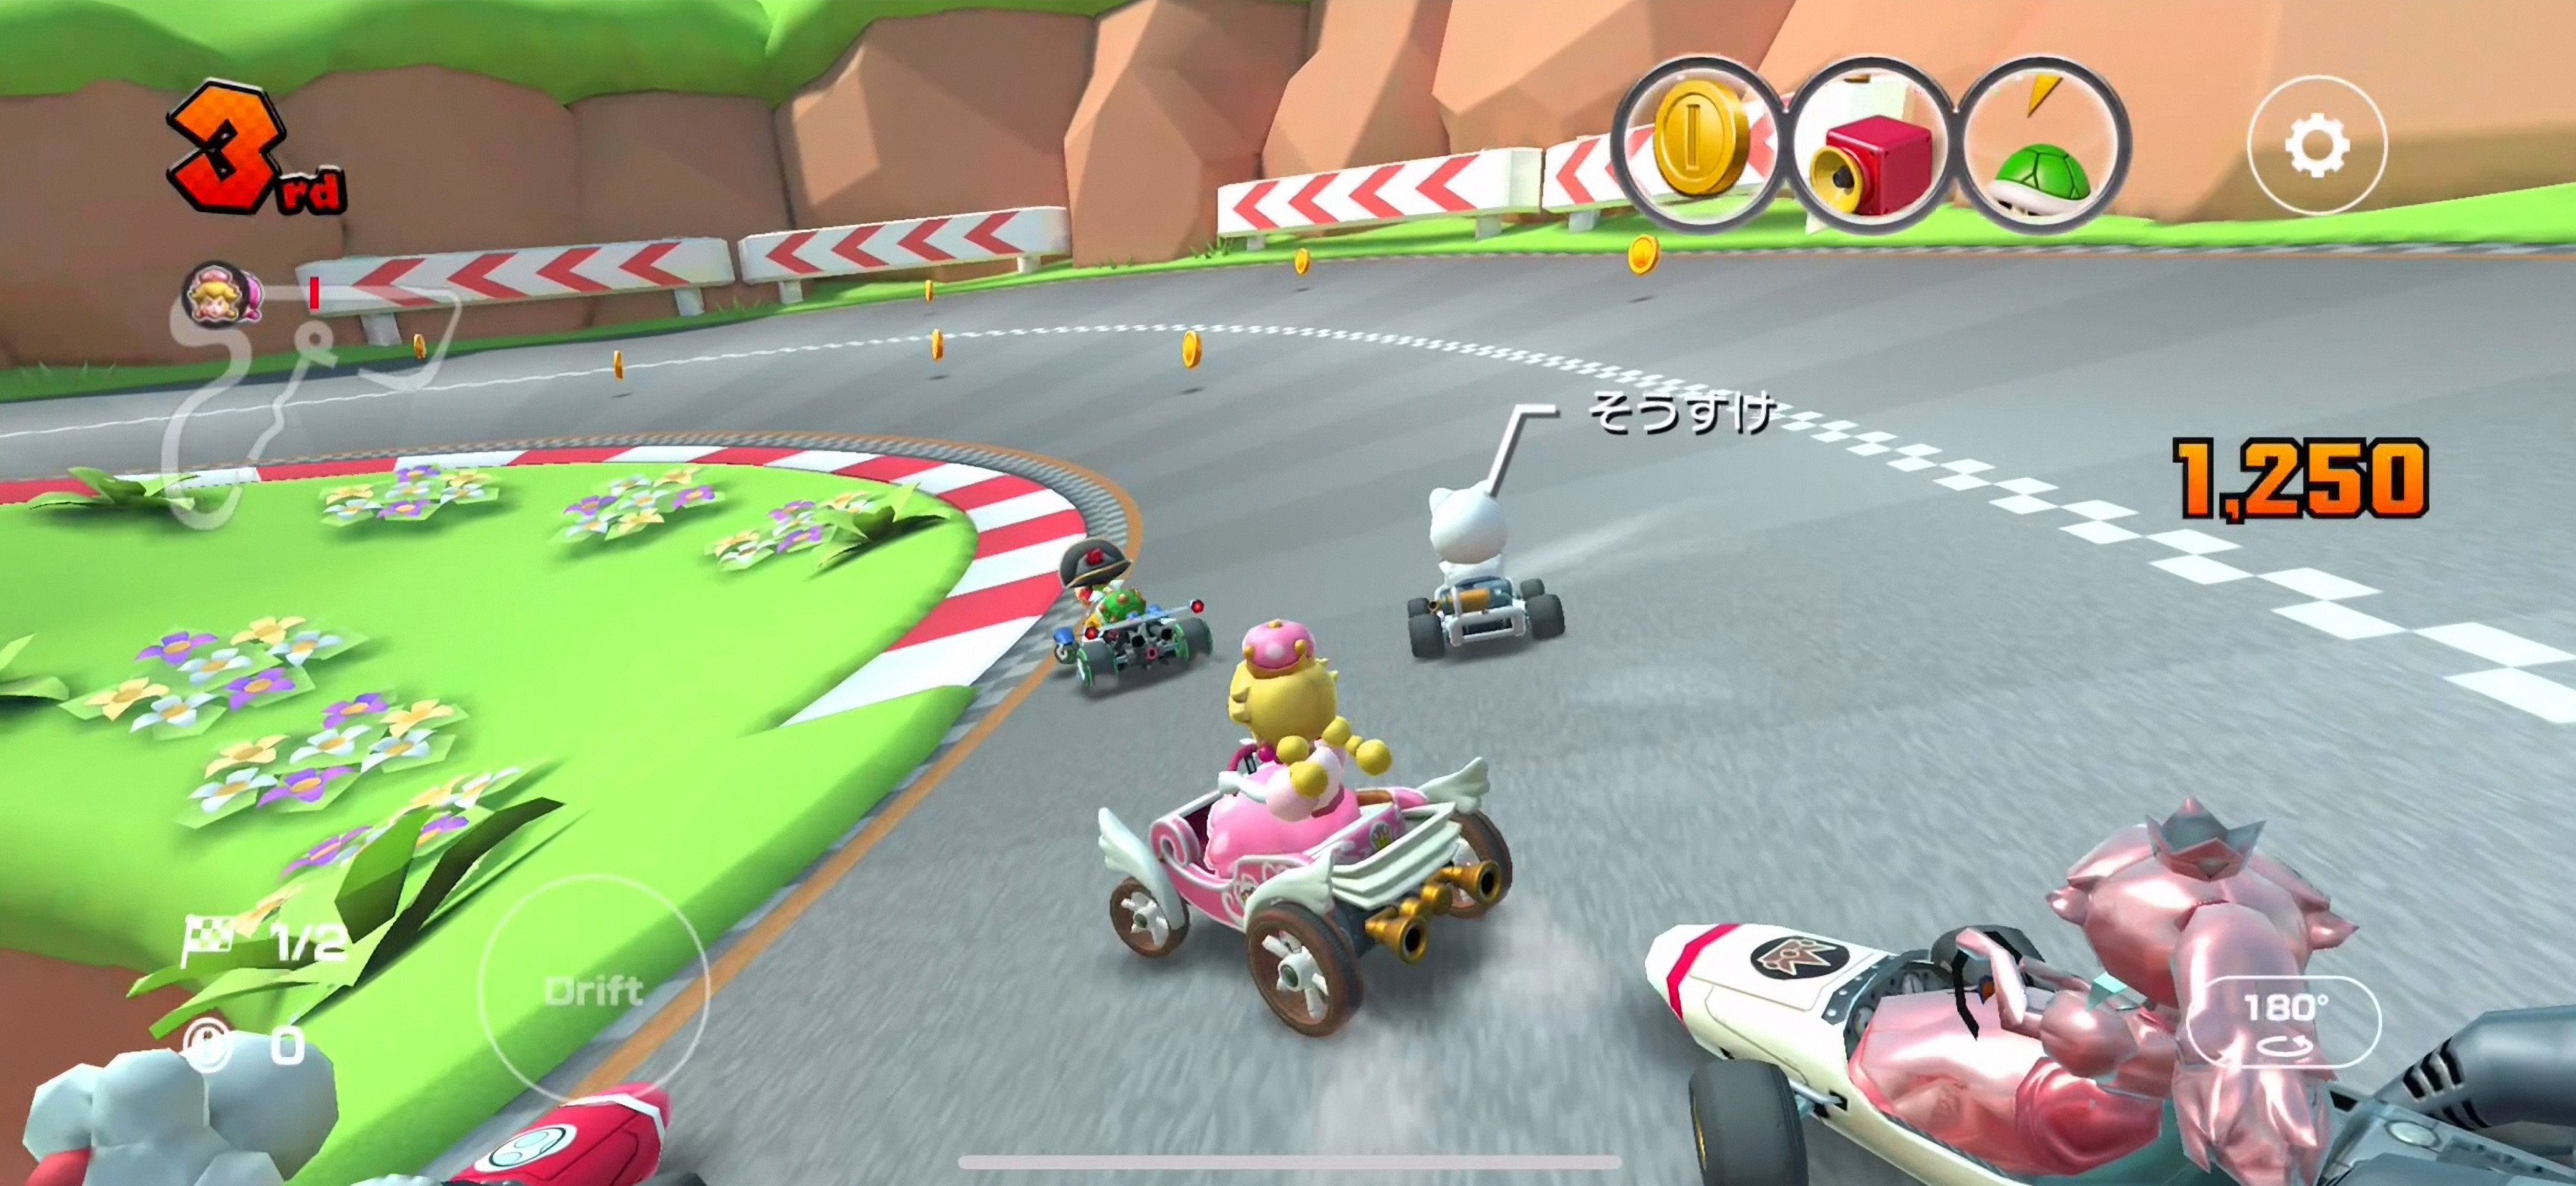 Mario Kart Tour vs. Sonic Racing: Which game should you play